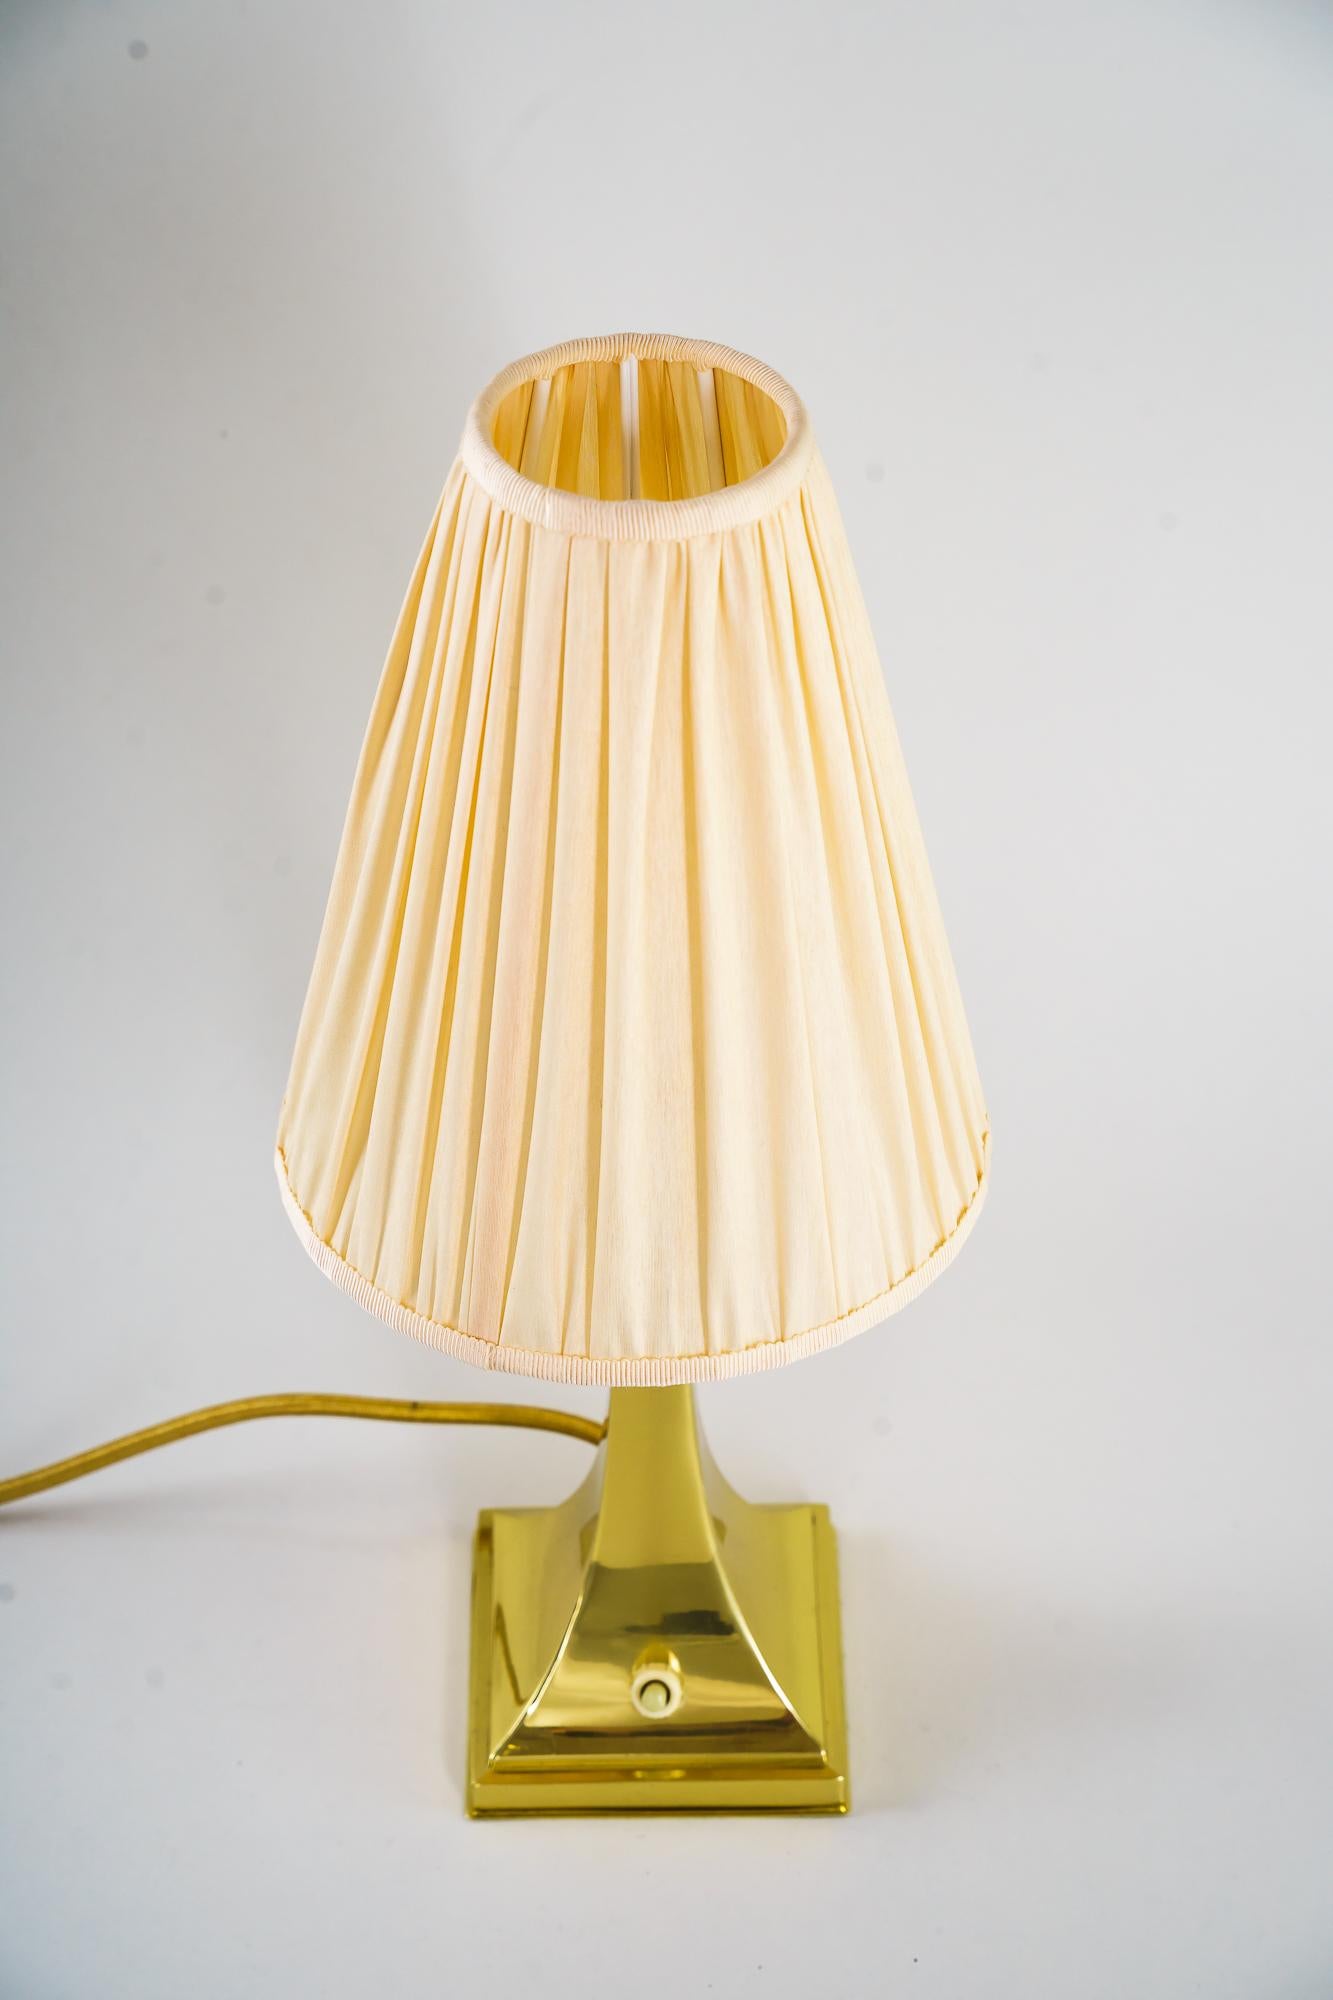 Art Deco table lamp wit fabric shade around 1920s
Brass polished and stove enamelled
The shade is new ( replaced ).